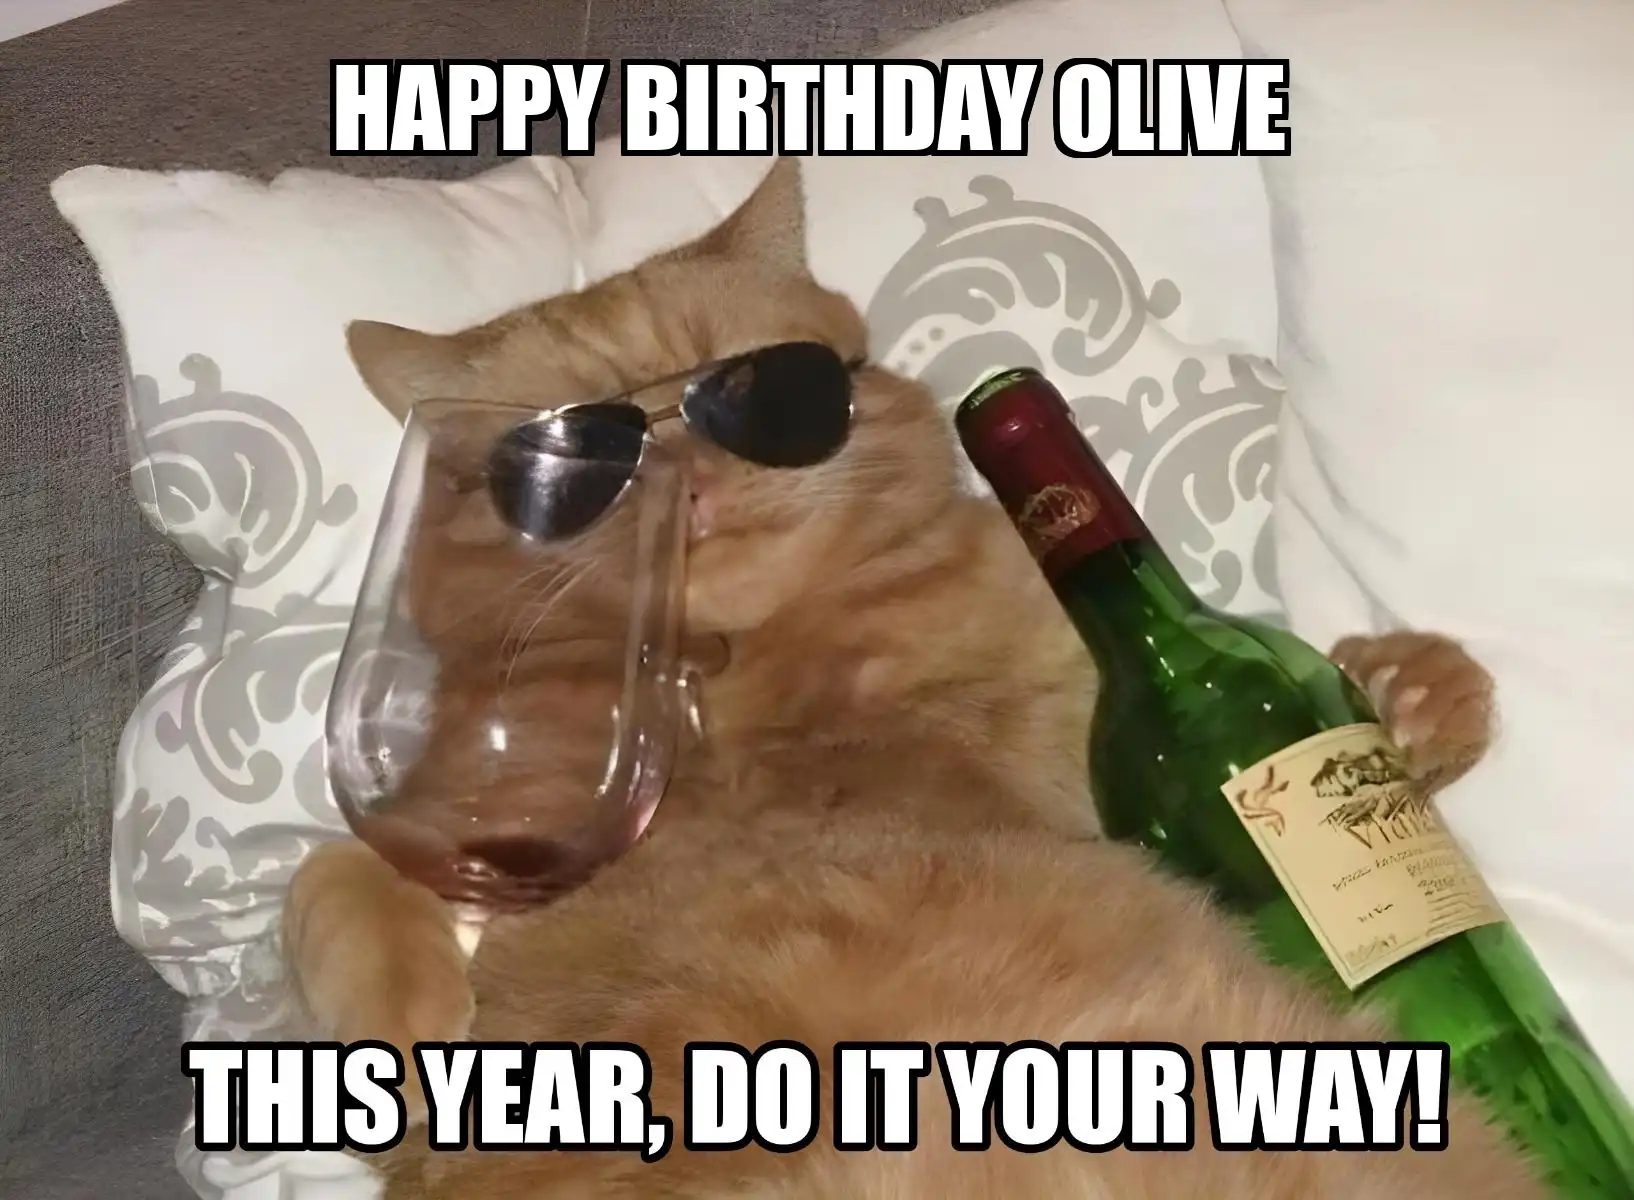 Happy Birthday Olive This Year Do It Your Way Meme